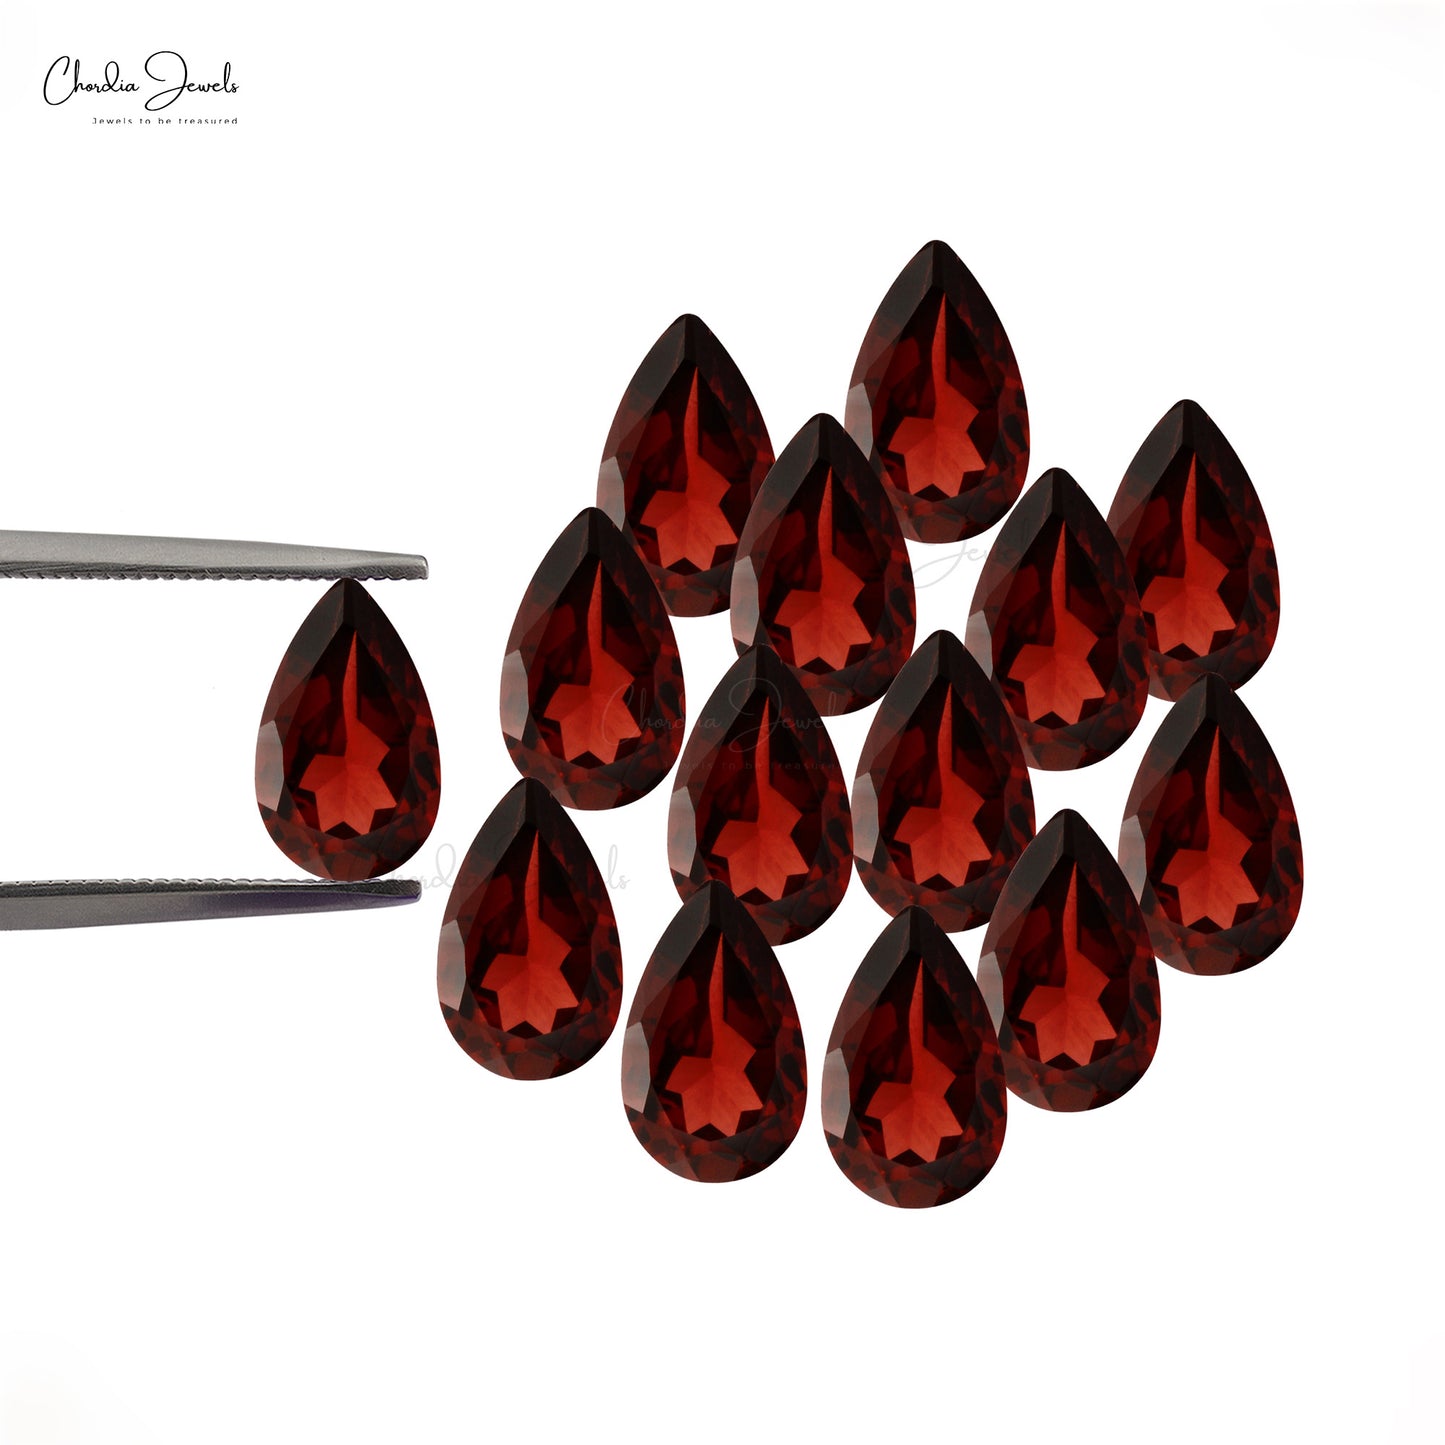 High Grade Mozambique Garnet 10X7MM Loose Faceted Gemstone for Rings, 1 Piece